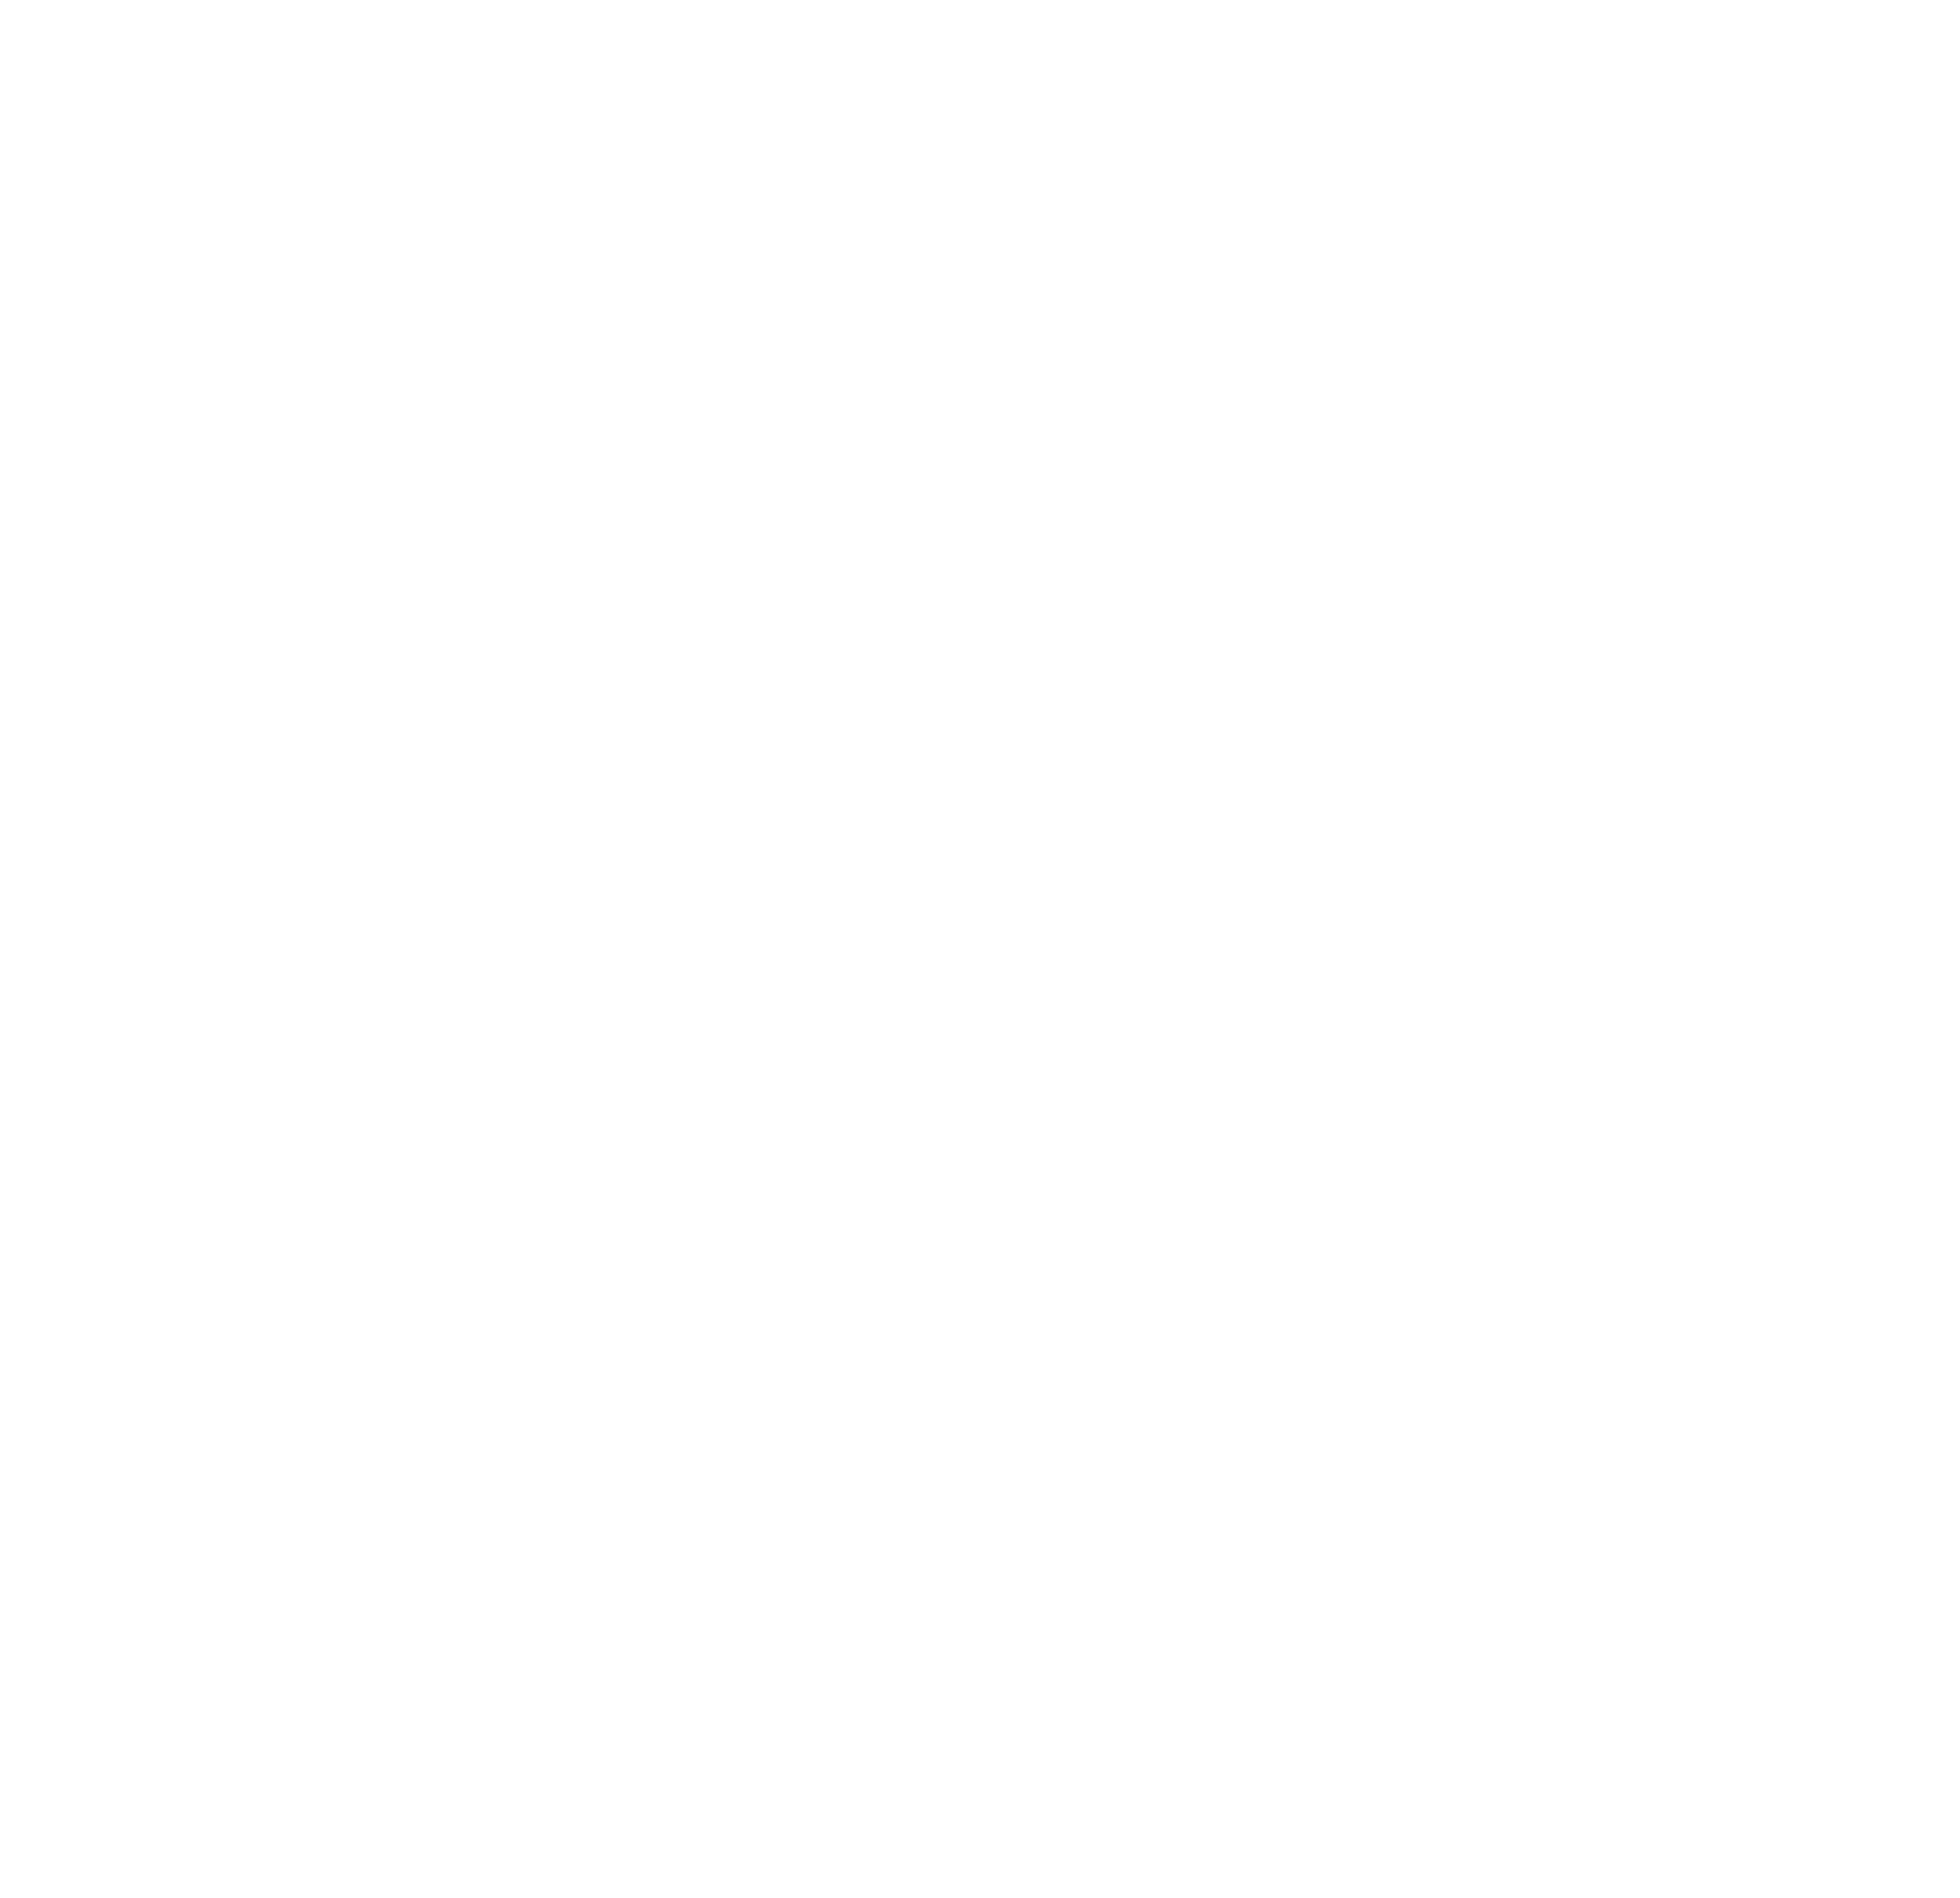 Orbital: The Electronic Journal of Chemistry